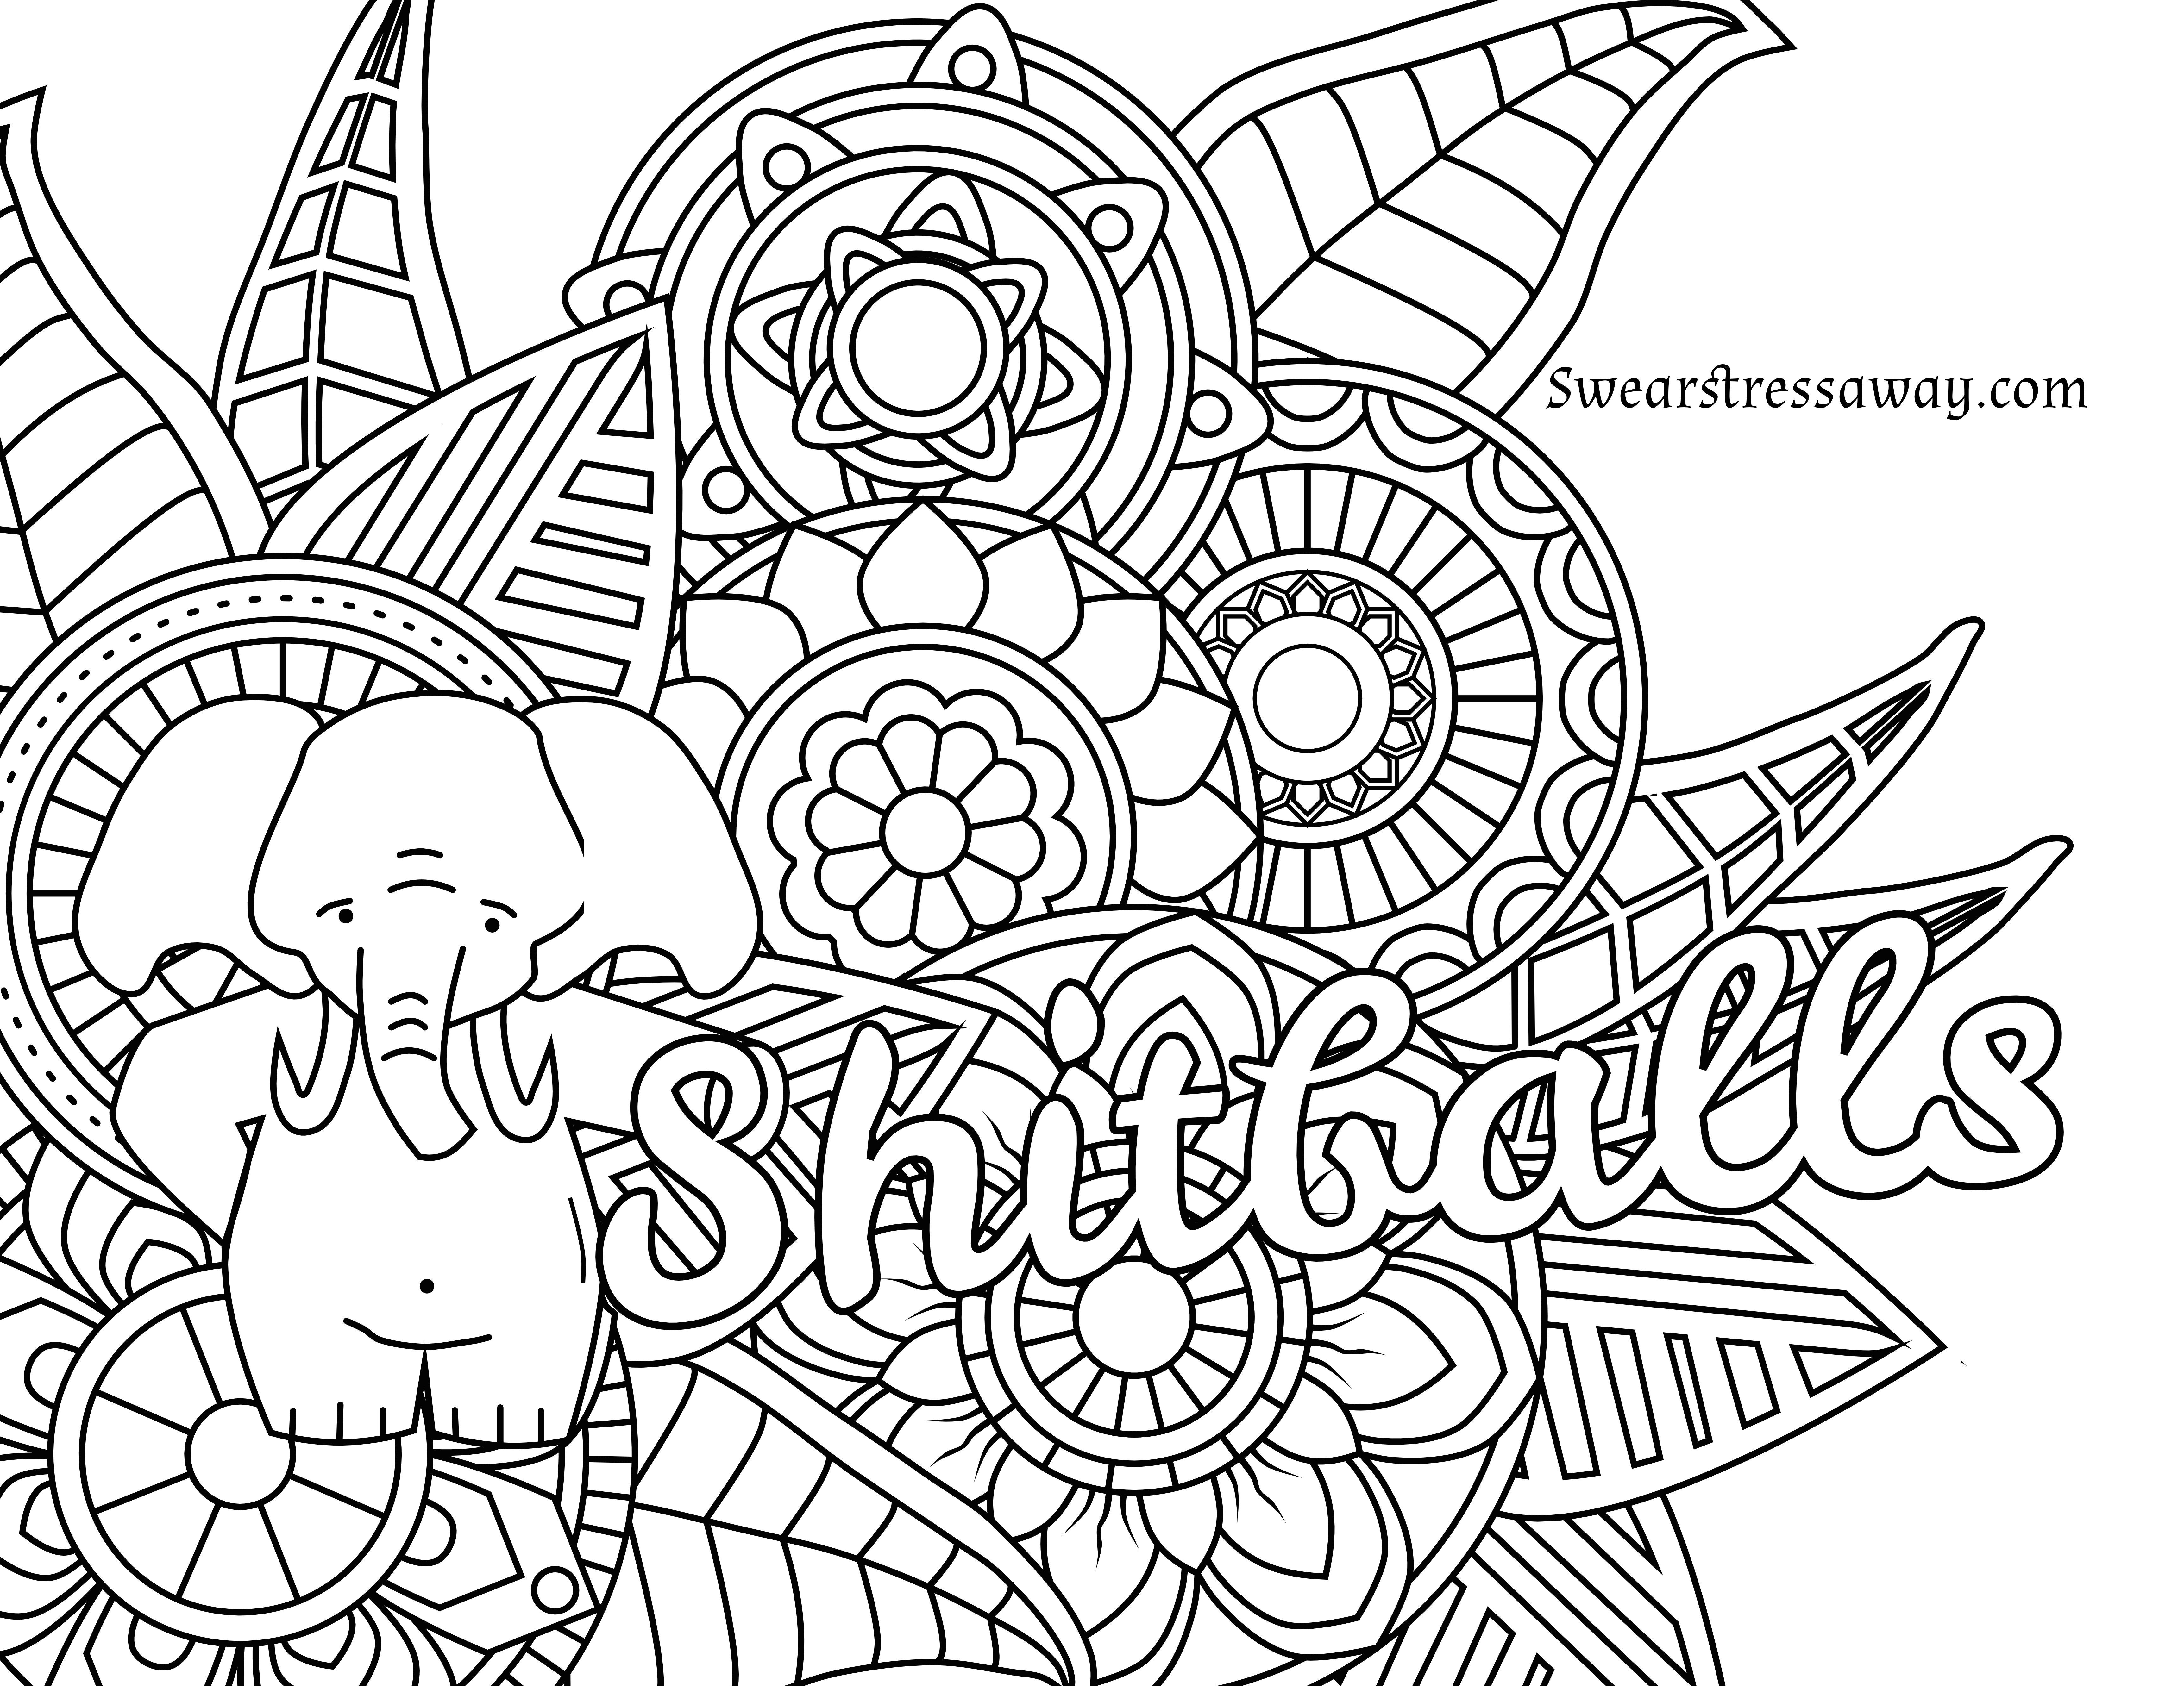 Coloring Pages : Free Printable Coloring Pages Adults Quotes For - Free Printable Coloring Pages